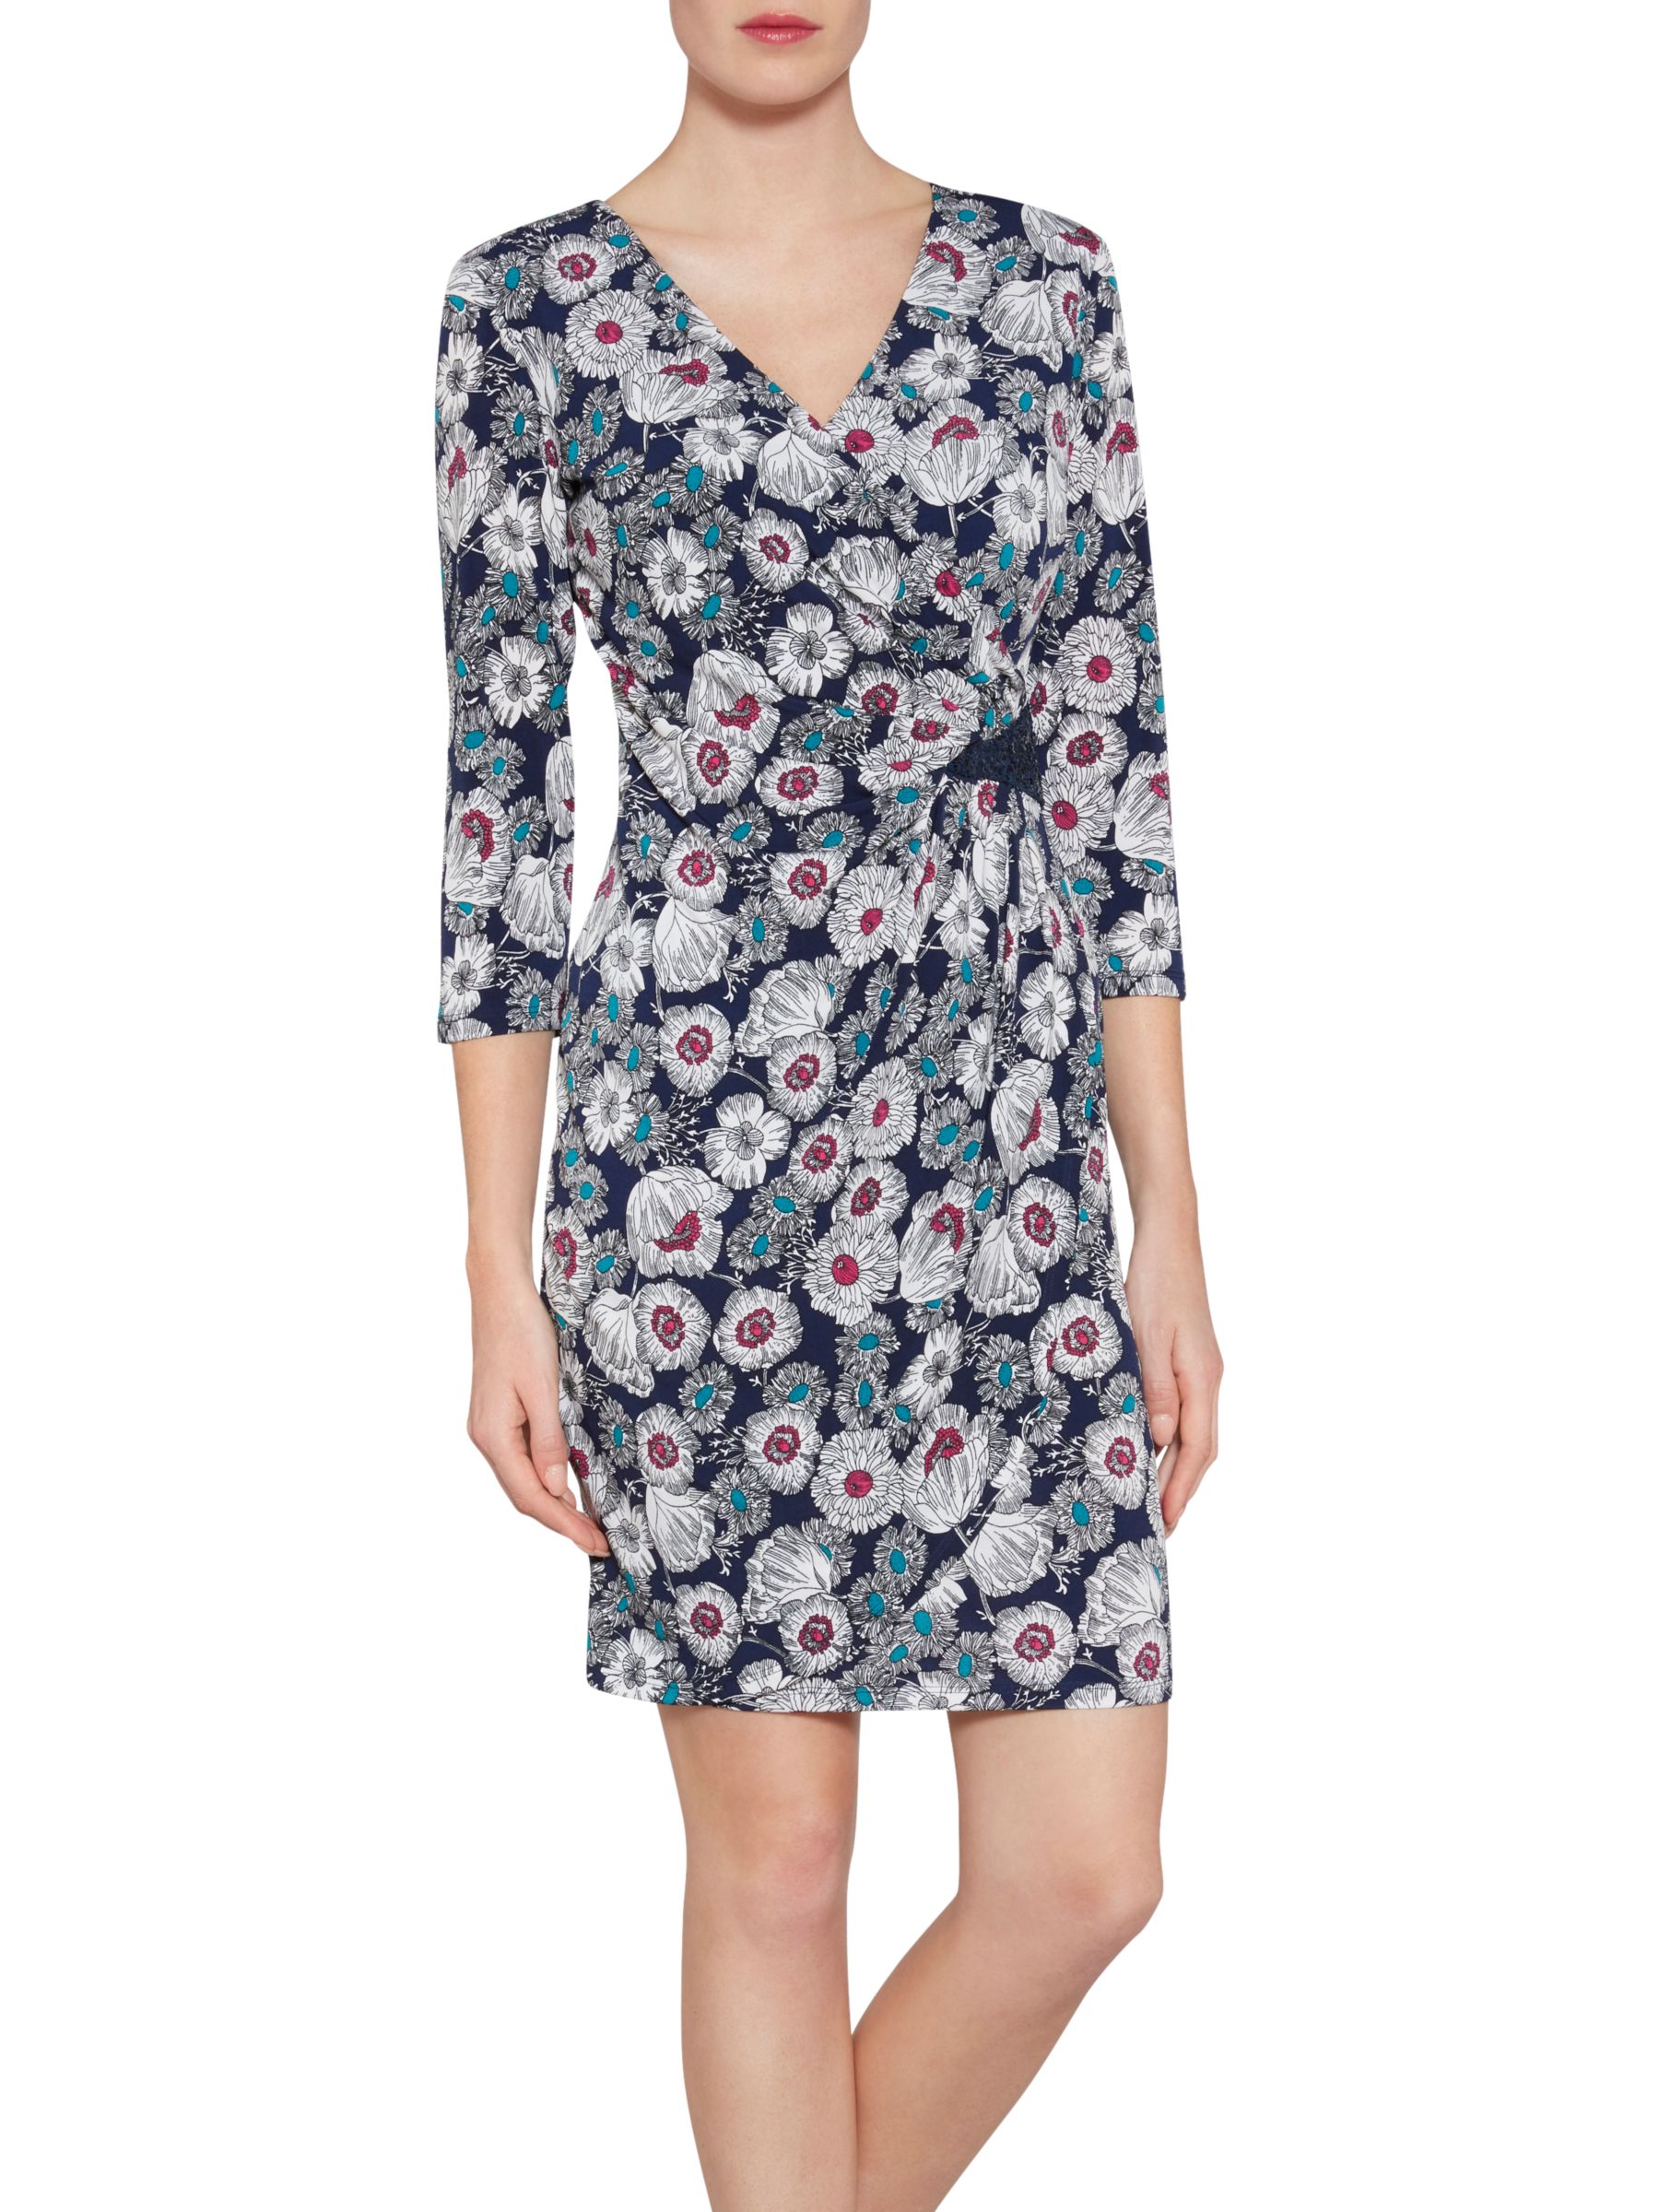 Gina Bacconi Flower Print Jersey Dress With Sequins, Navy at John Lewis ...